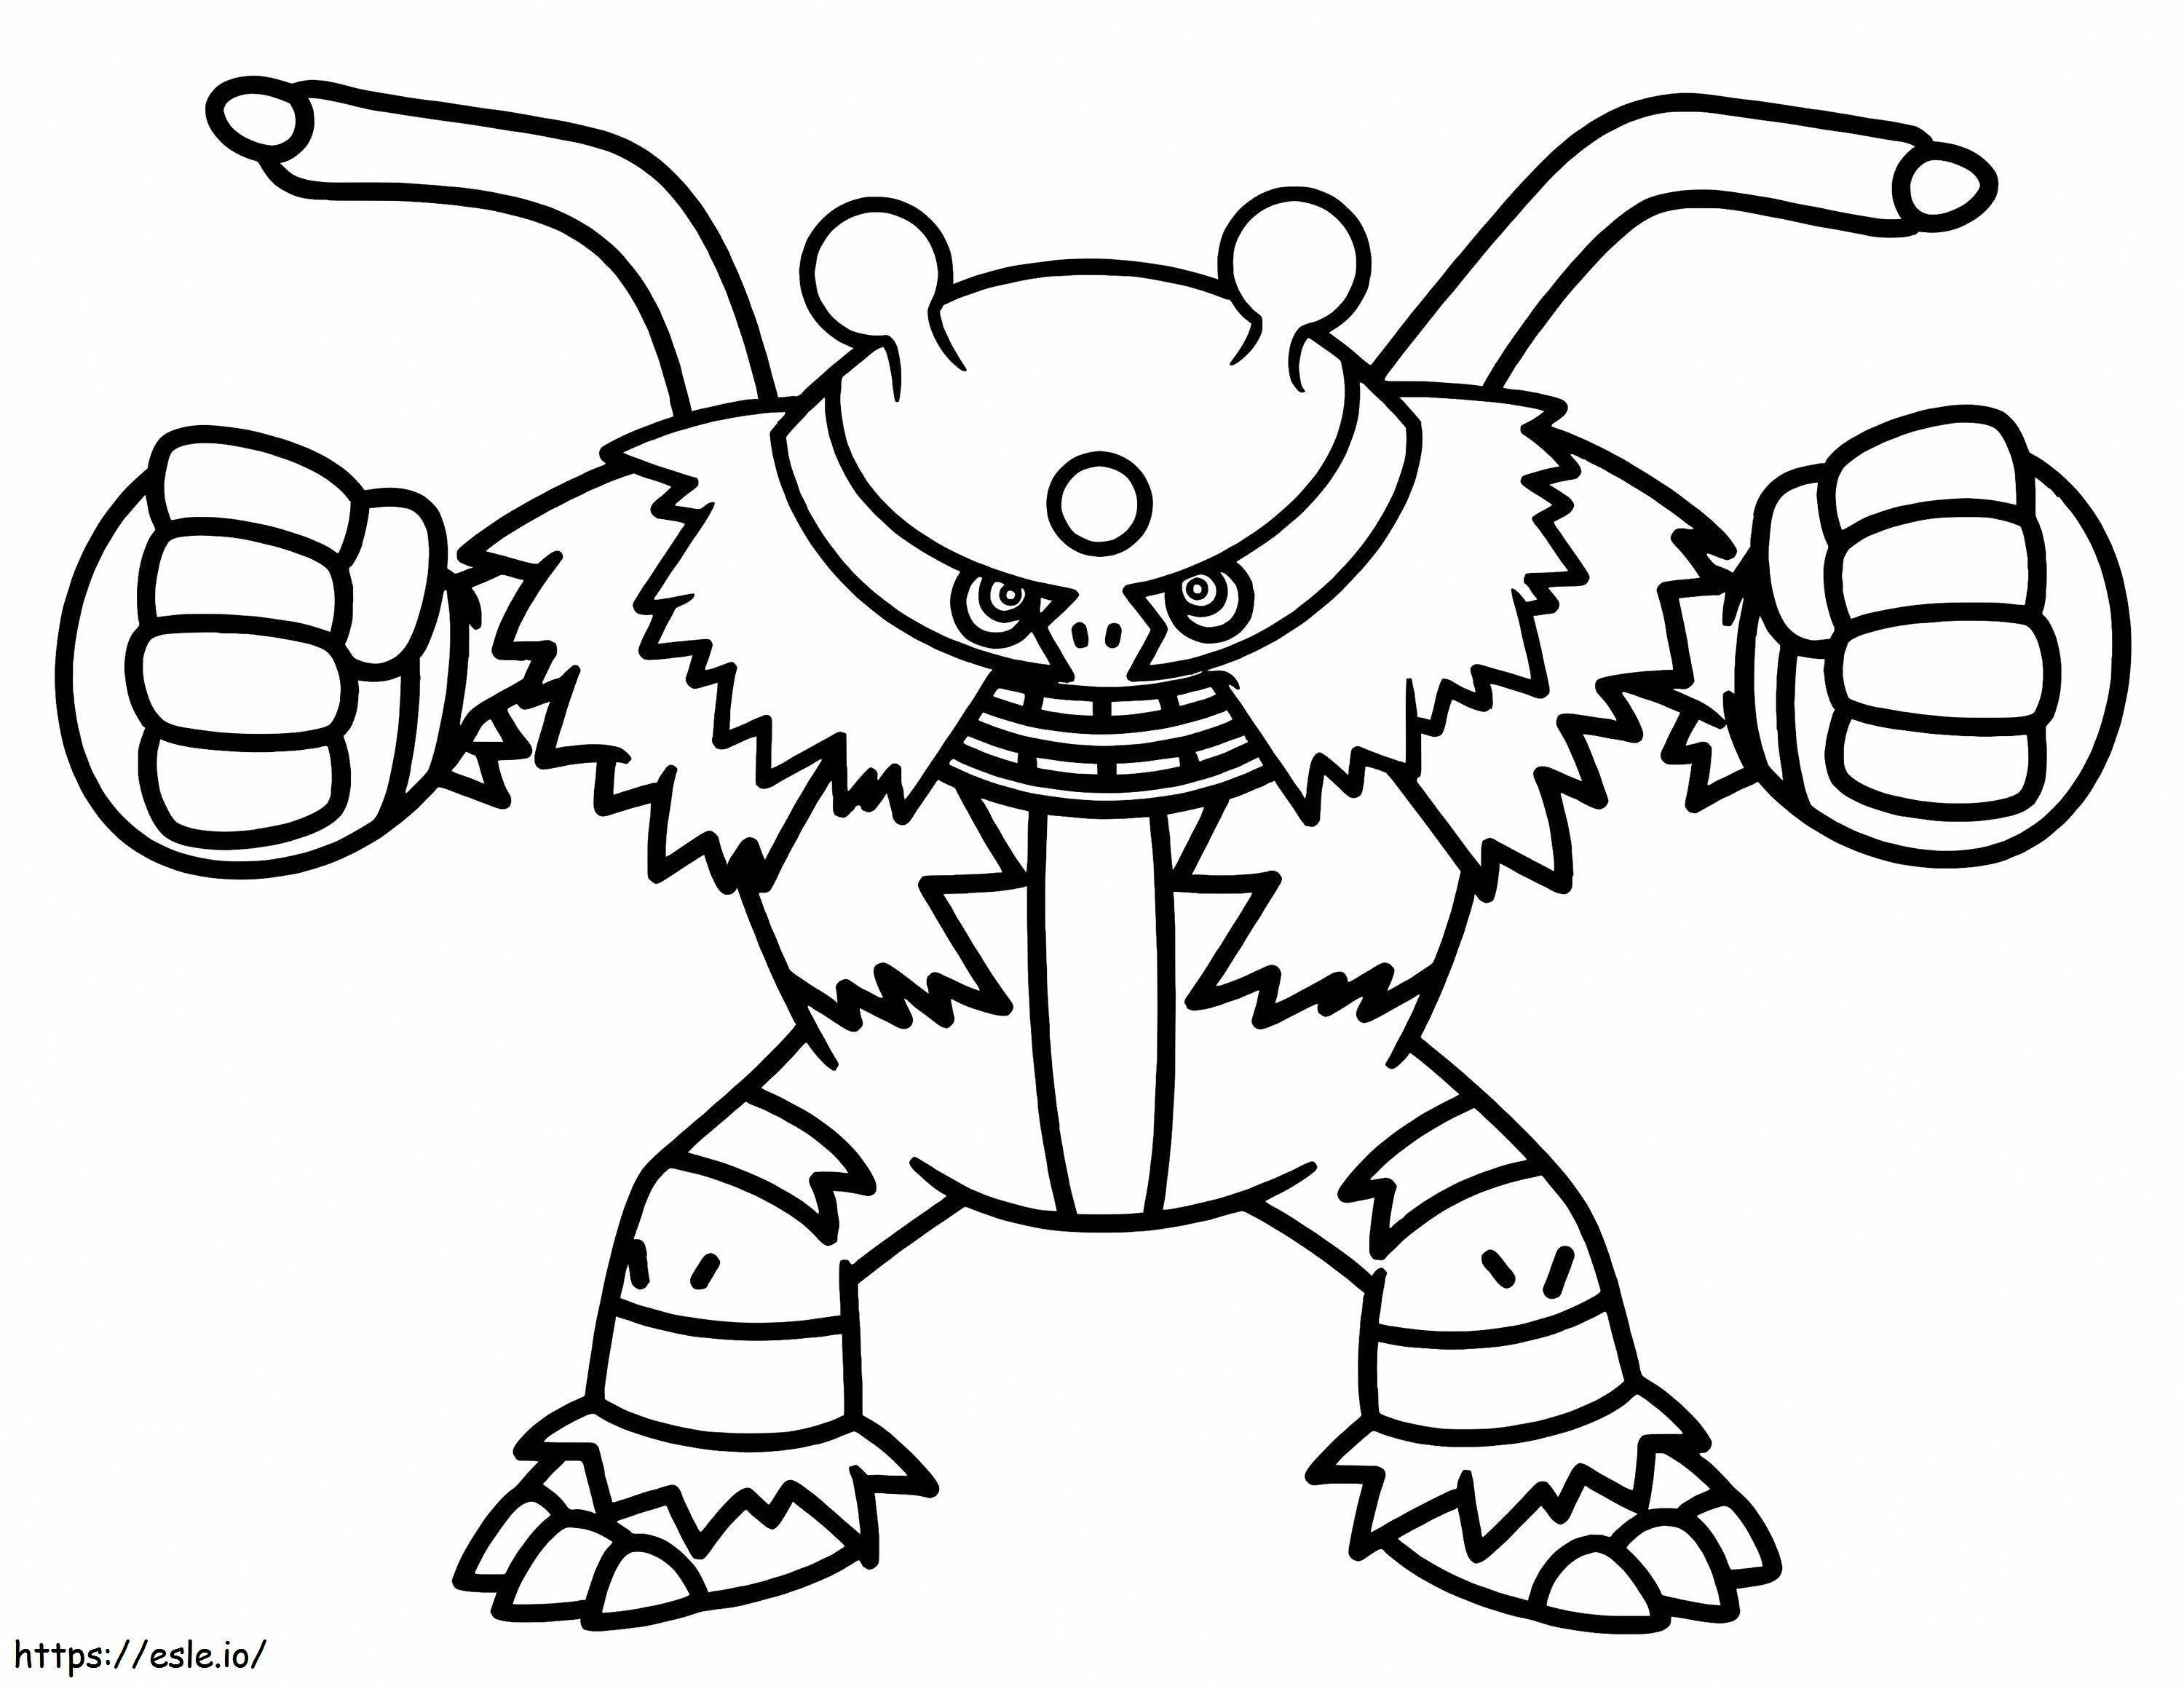 Electivire 2 coloring page